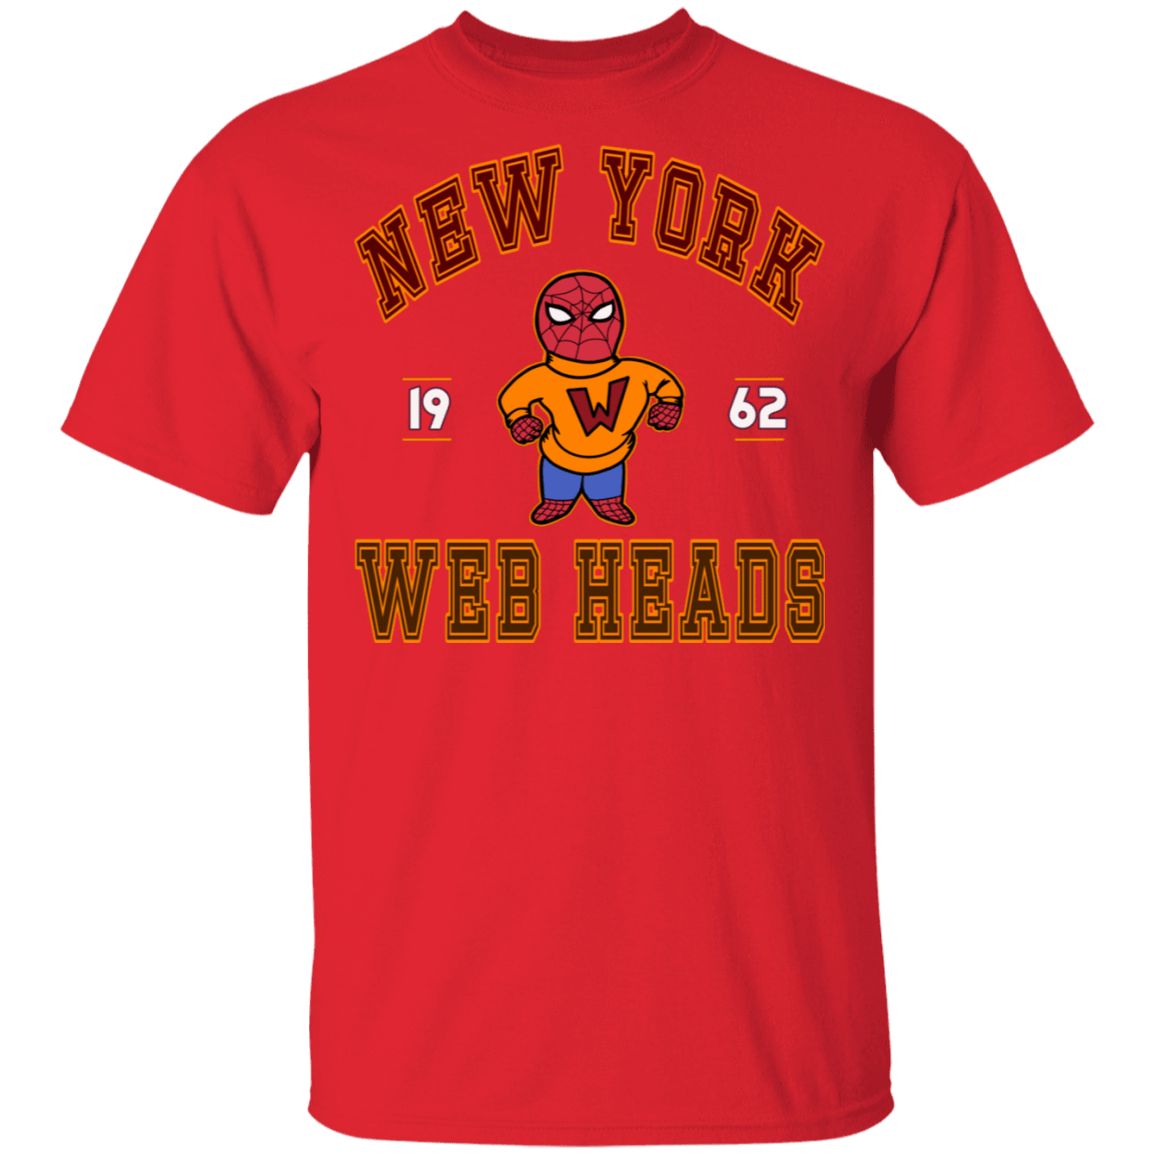 T-Shirts Red / S New York Web Heads T-Shirt